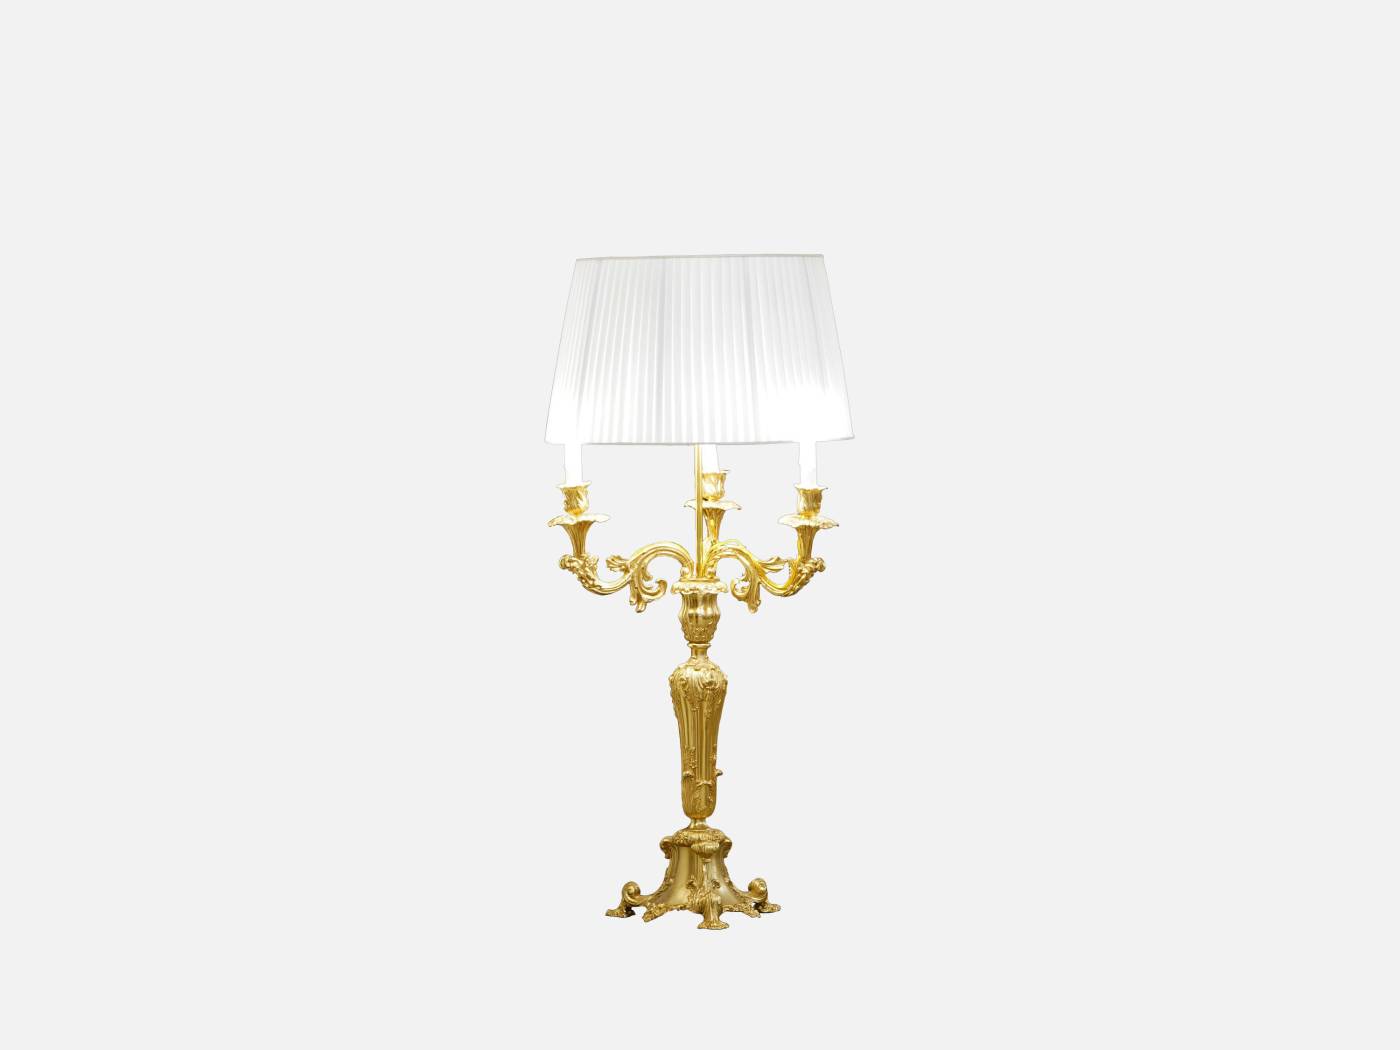 ART. 2210 – Discover the elegance of luxury classic Lighting made in Italy by C.G. Capelletti. Luxury classic furniture that combines style and craftsmanship.